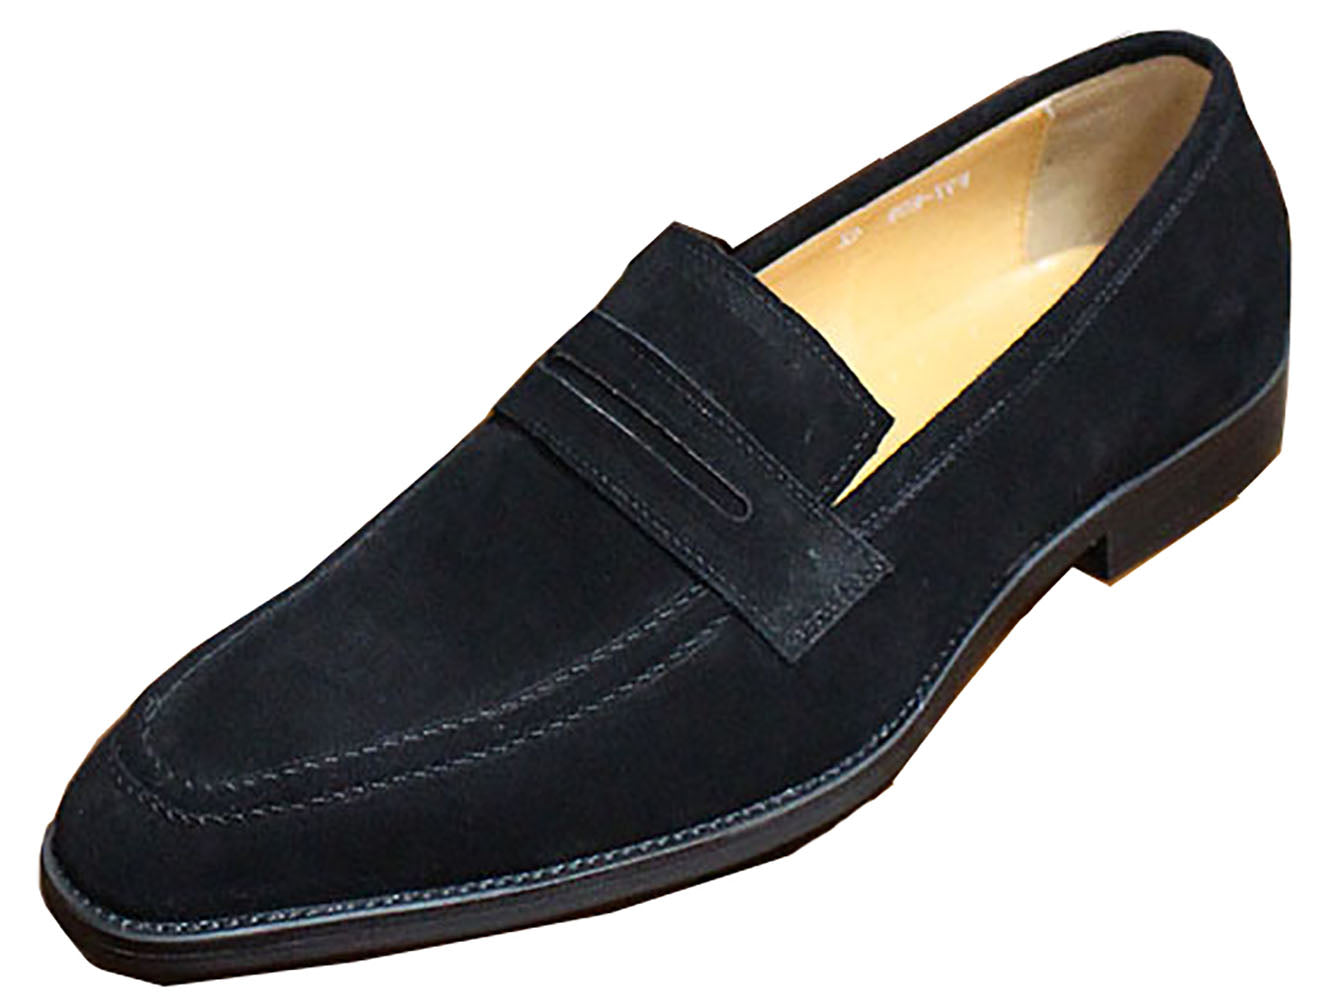 Men's Handmade Suede Silp On Penny Loafers